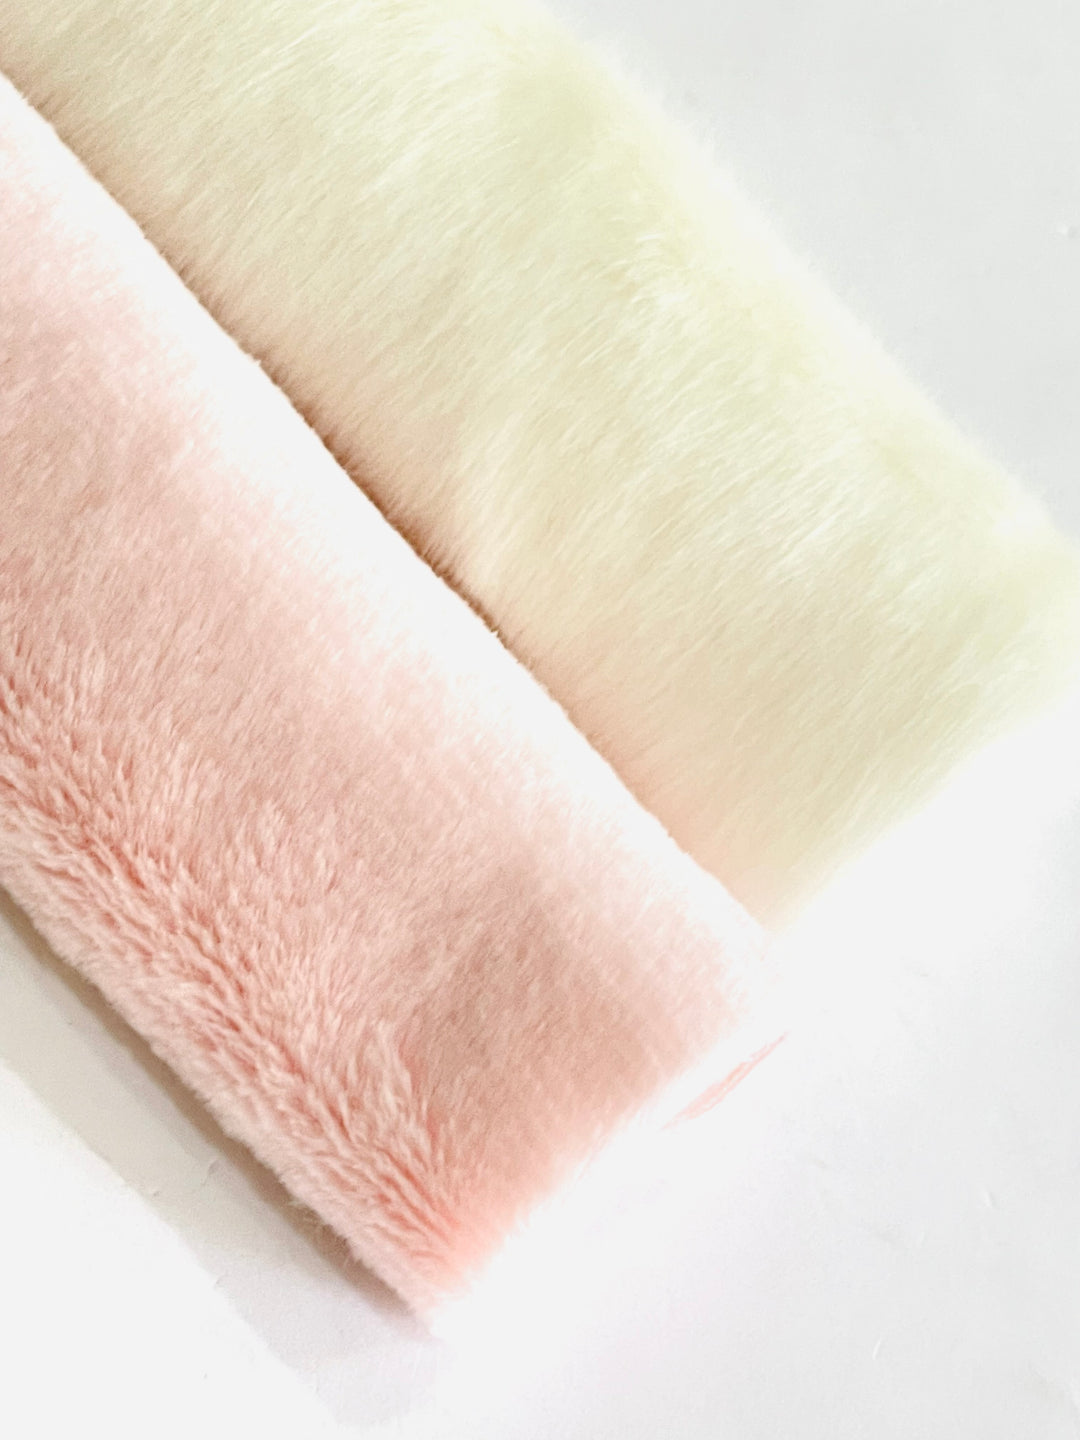 Faux Fur Fabric Sheets - Baby Pink and White